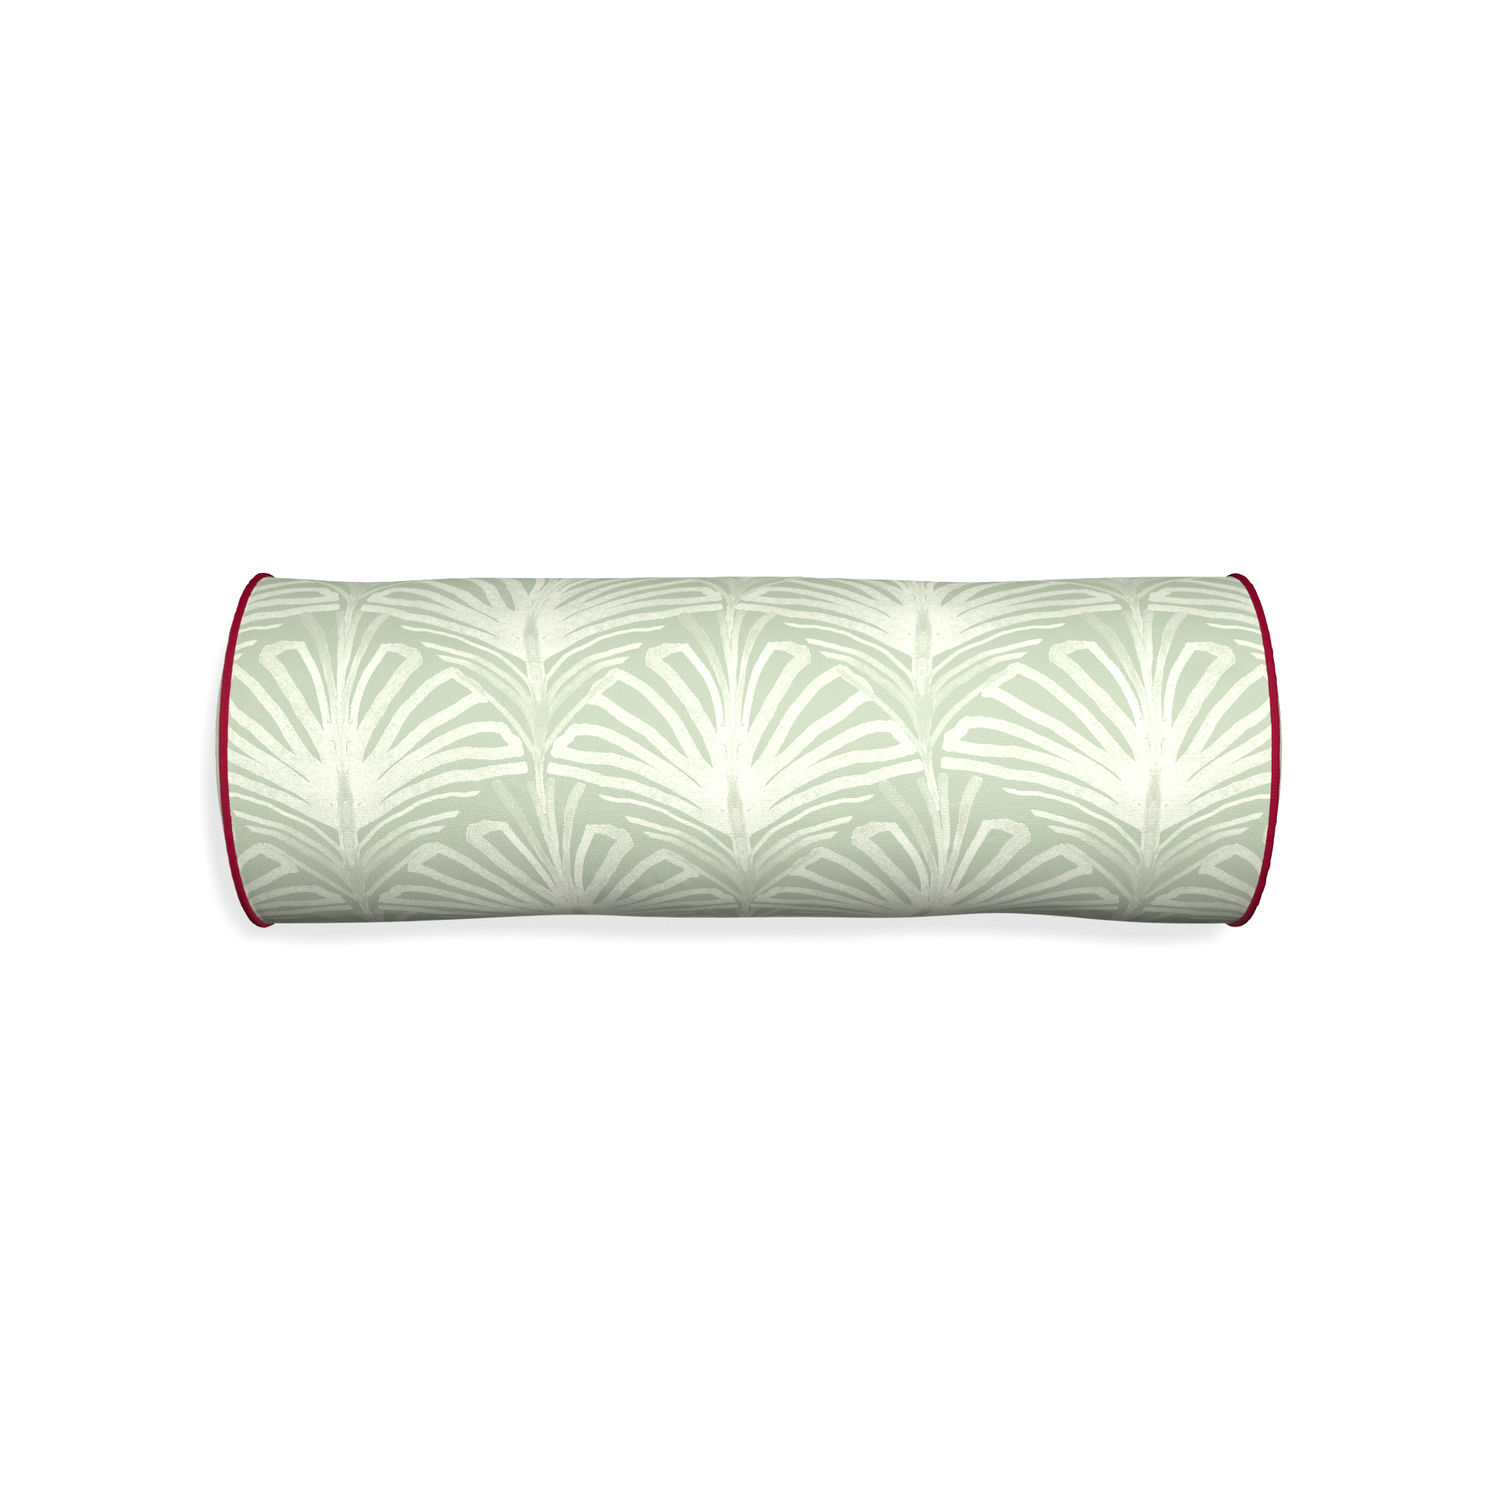 Bolster suzy sage custom sage green palmpillow with raspberry piping on white background